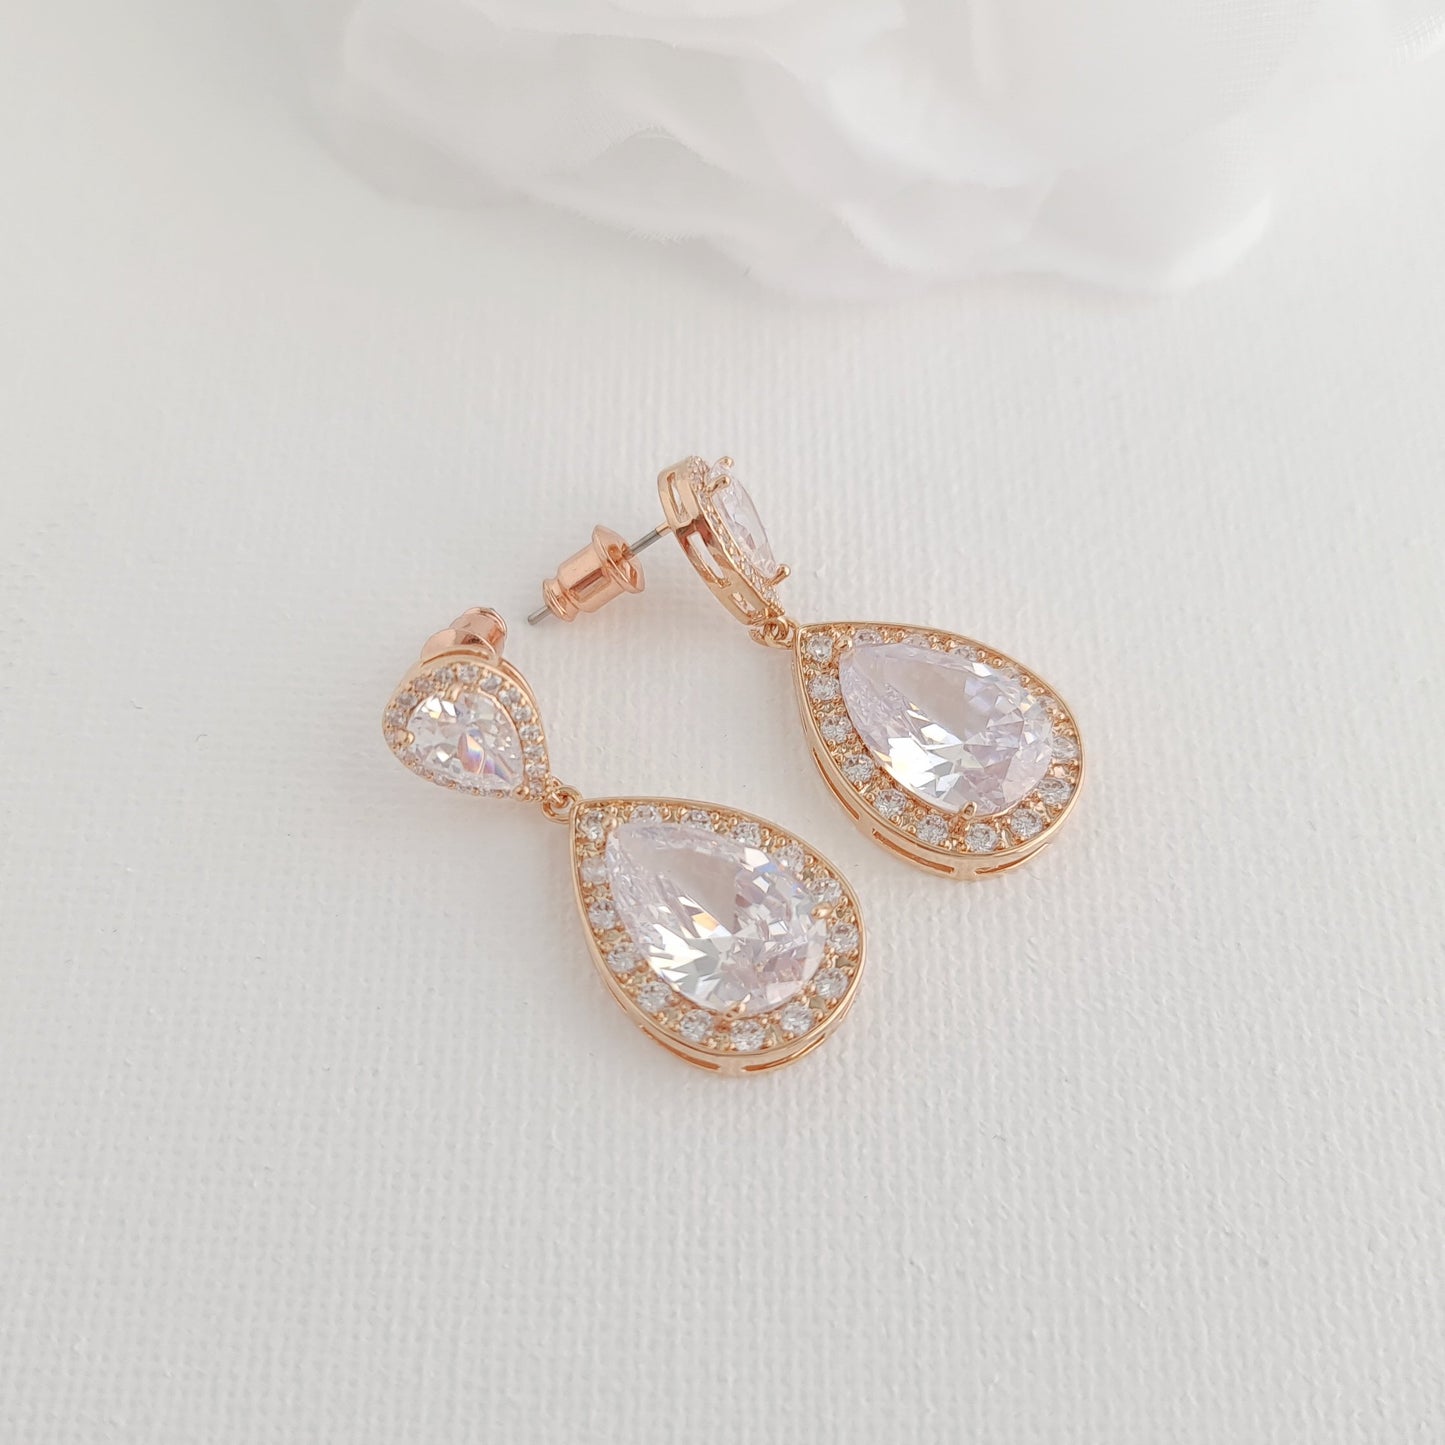 Wedding Earrings for Brides, Bridesmaids in Teardrops-Evelyn